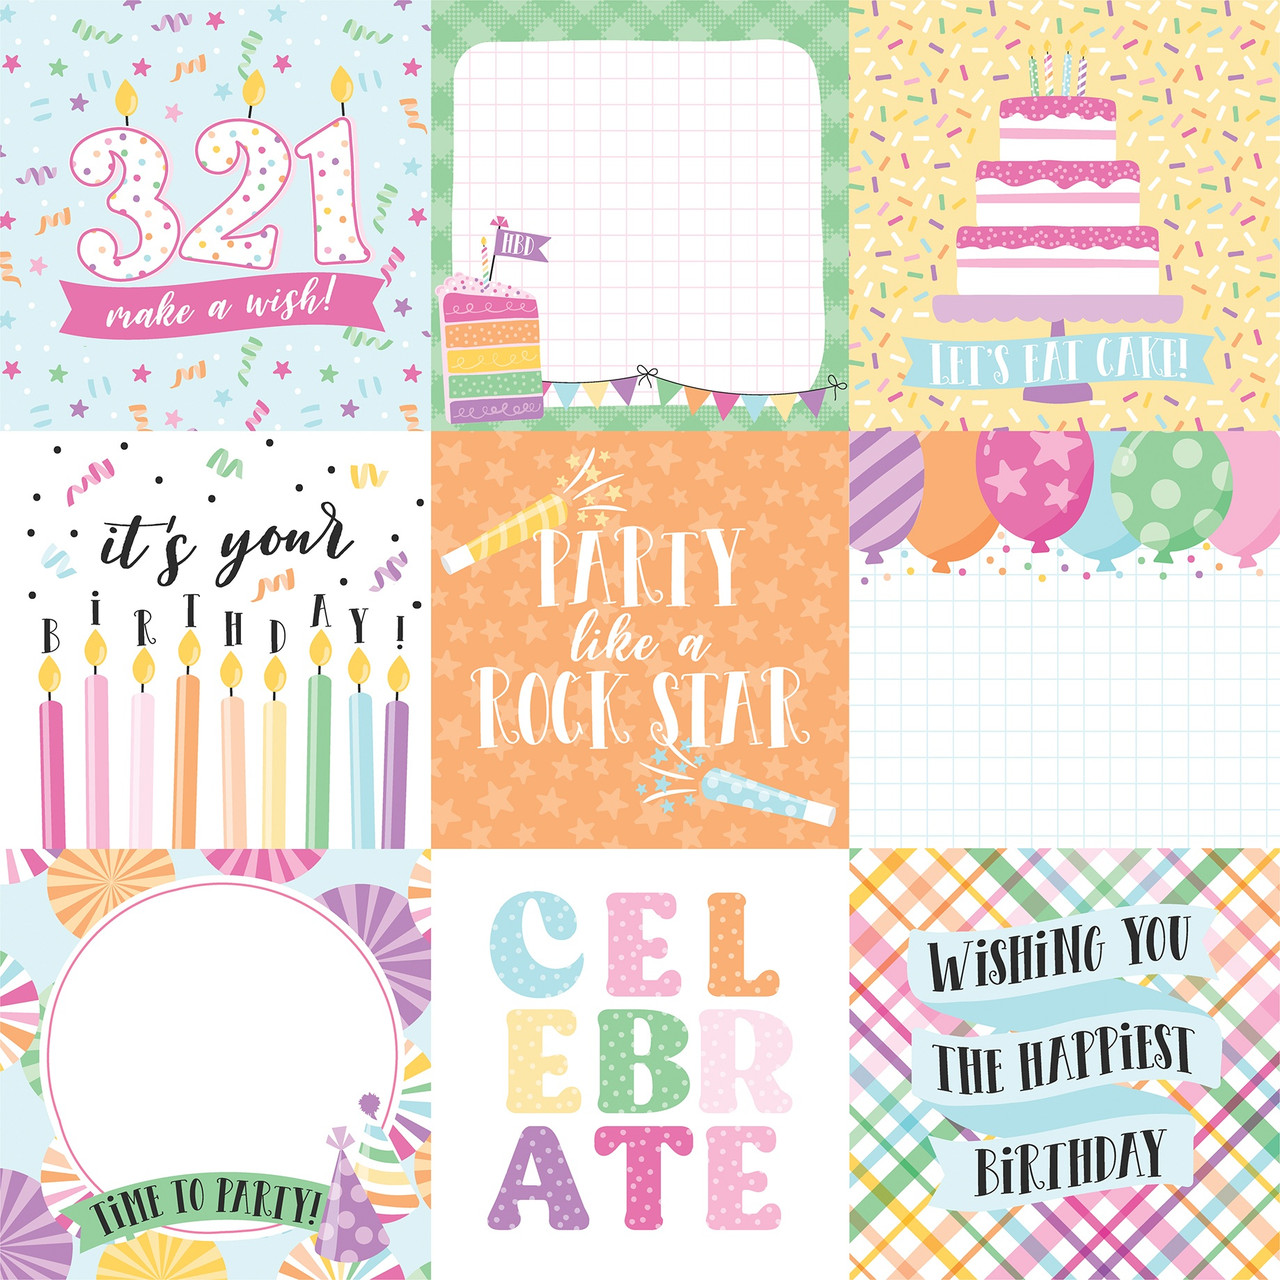 Let's Create Double-Sided Cardstock 12X12-3X4 Journaling Cards